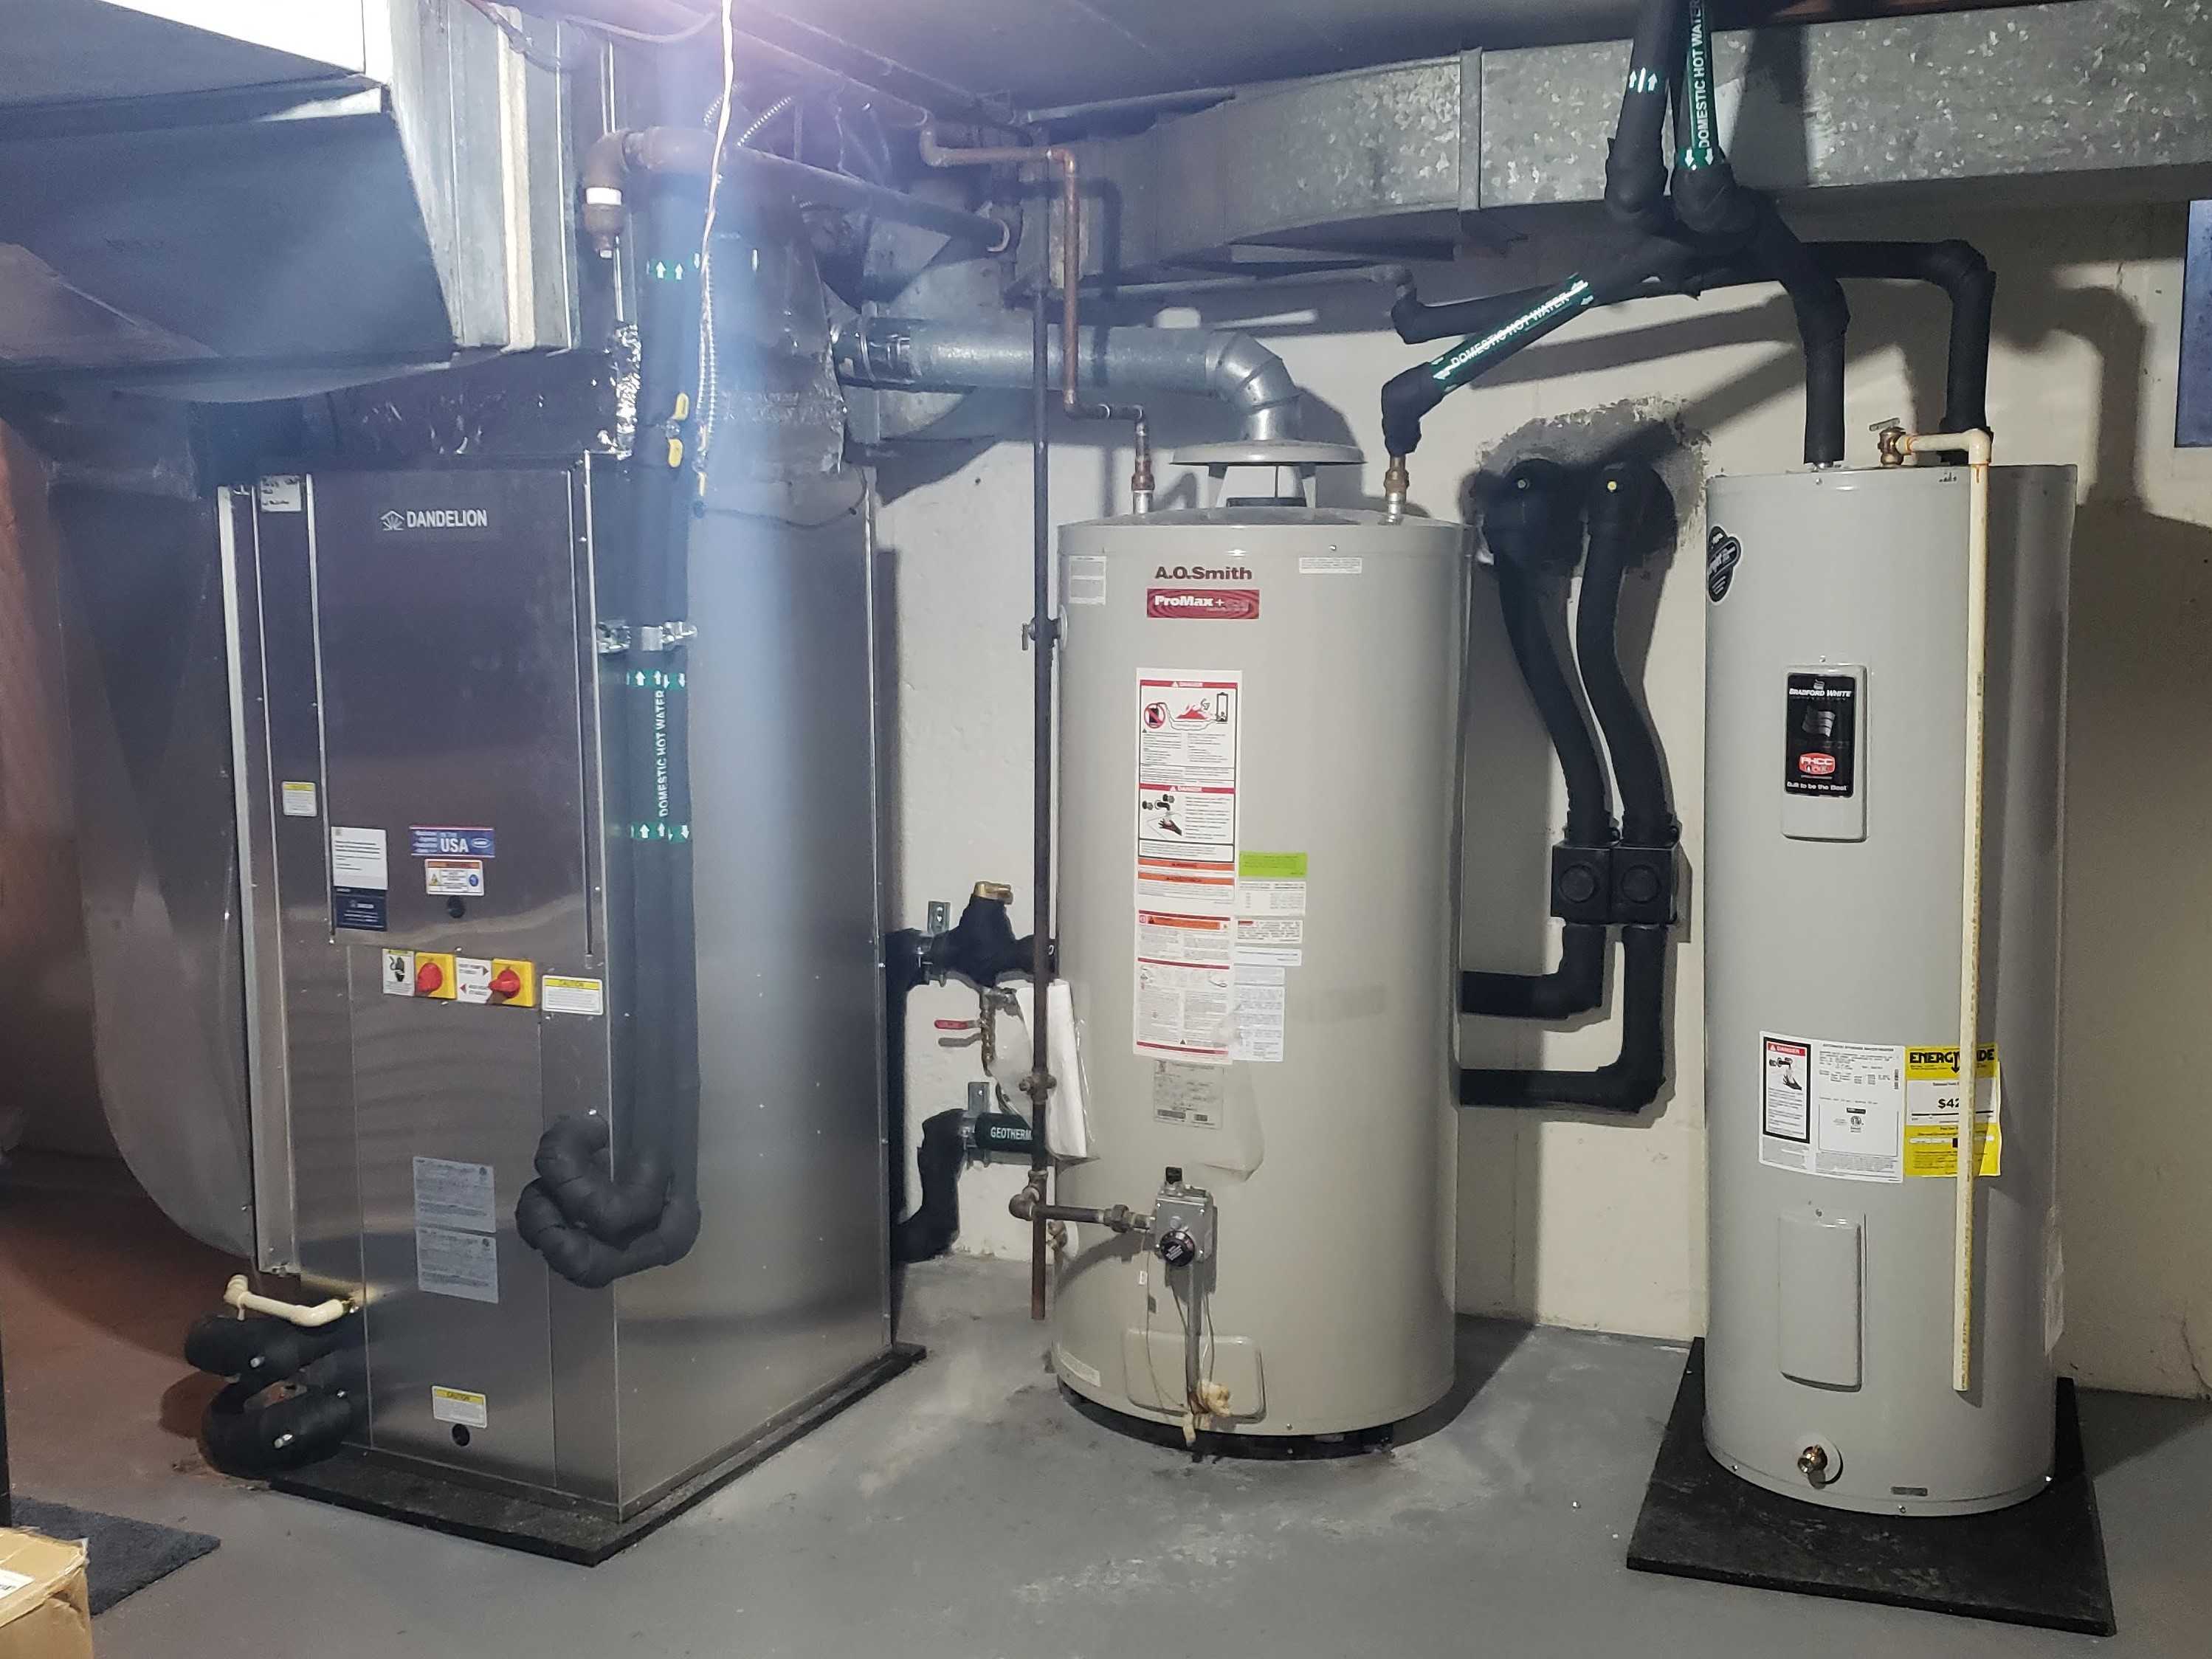 Installed geothermal heat pump and desuperheater